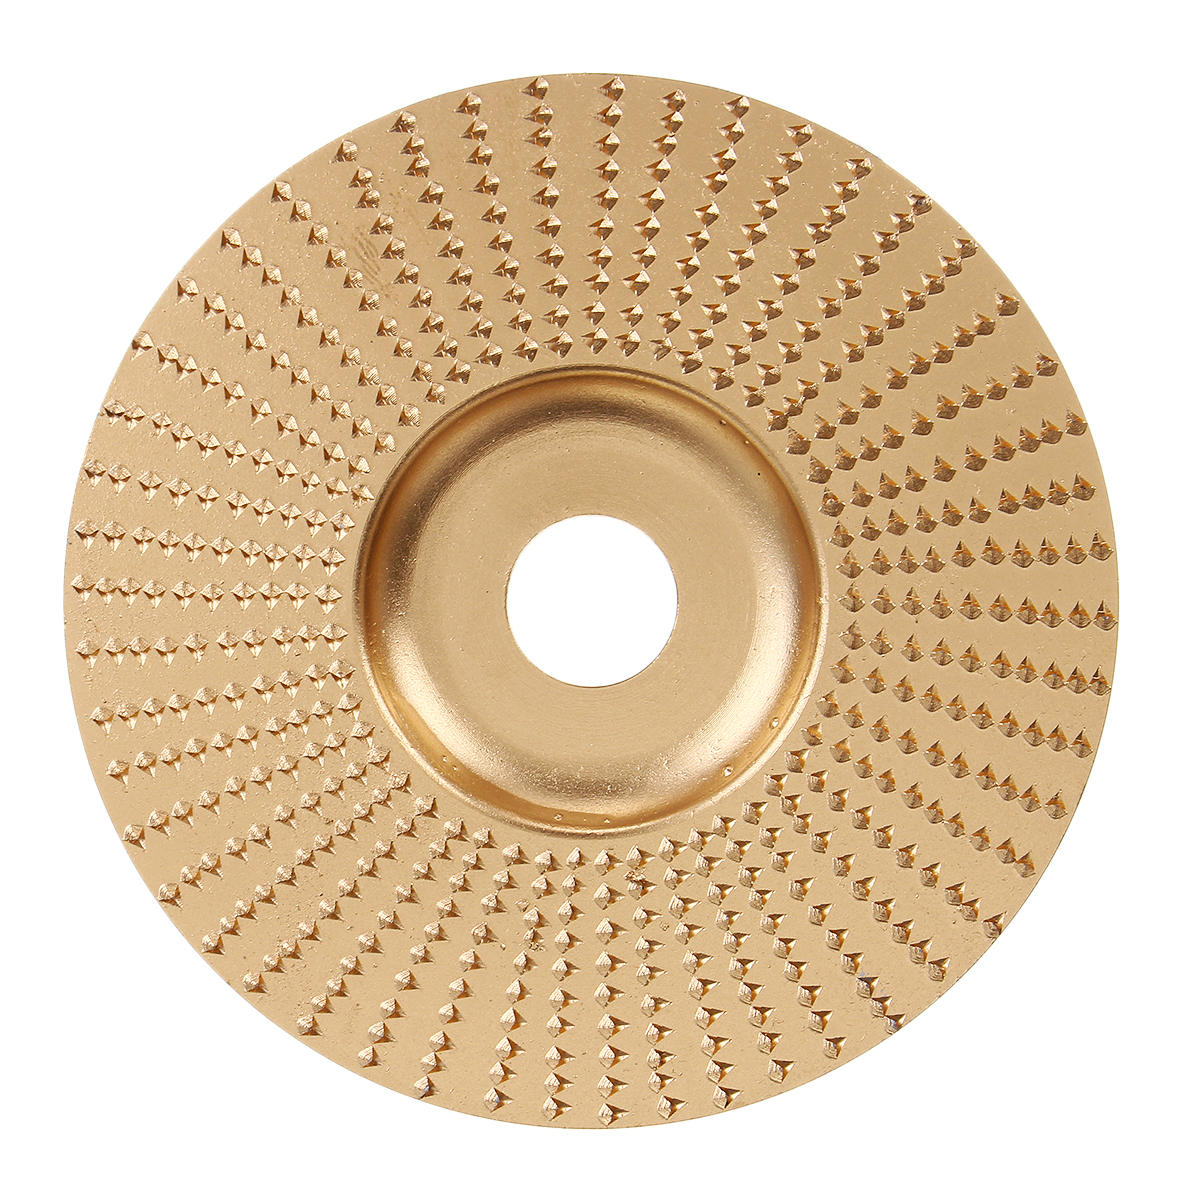 

100x16mm Carbide Wood Carving Disc Angle Grinder Shaping Disc Wood Grinding Wheel Rotary Disc Sanding Abrasive Disc Tool